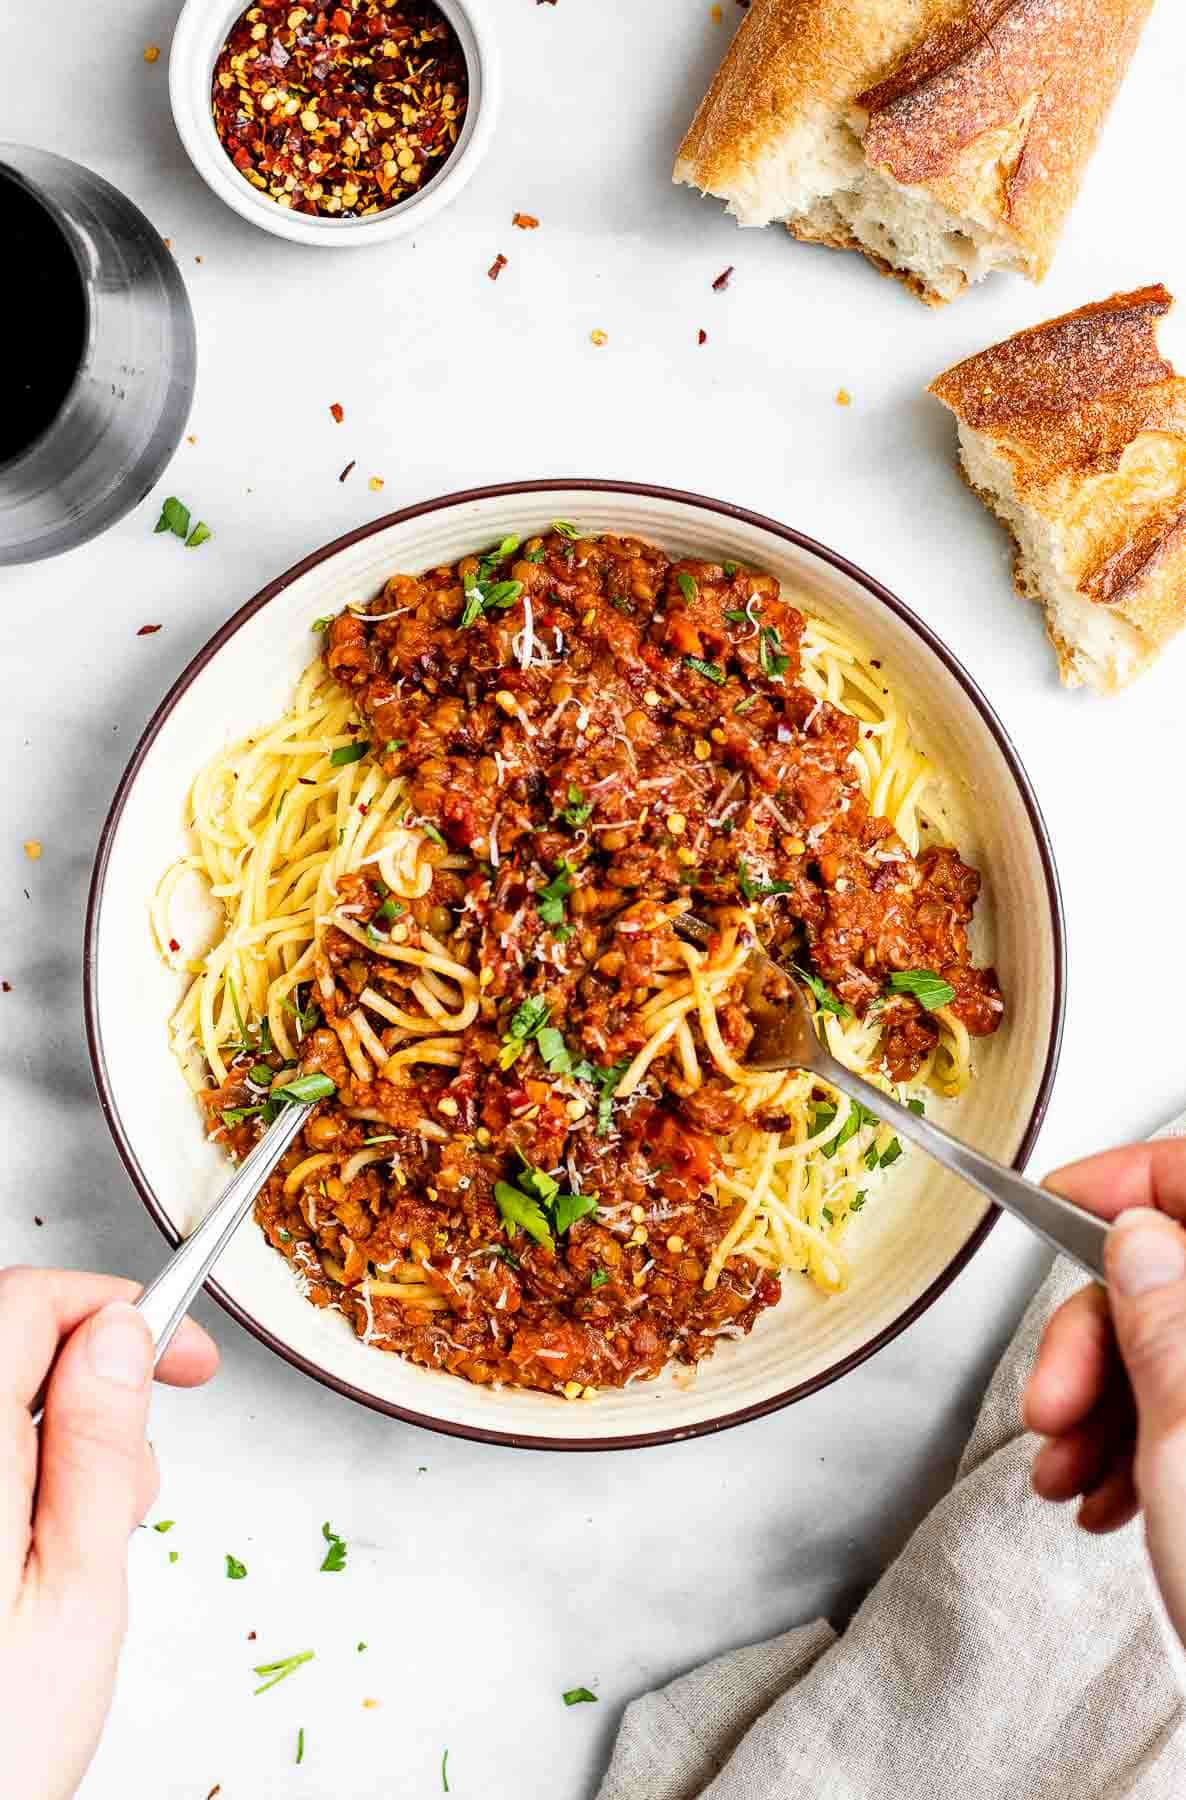 Two hands twirling together the spaghetti with lentil bolognese on top.